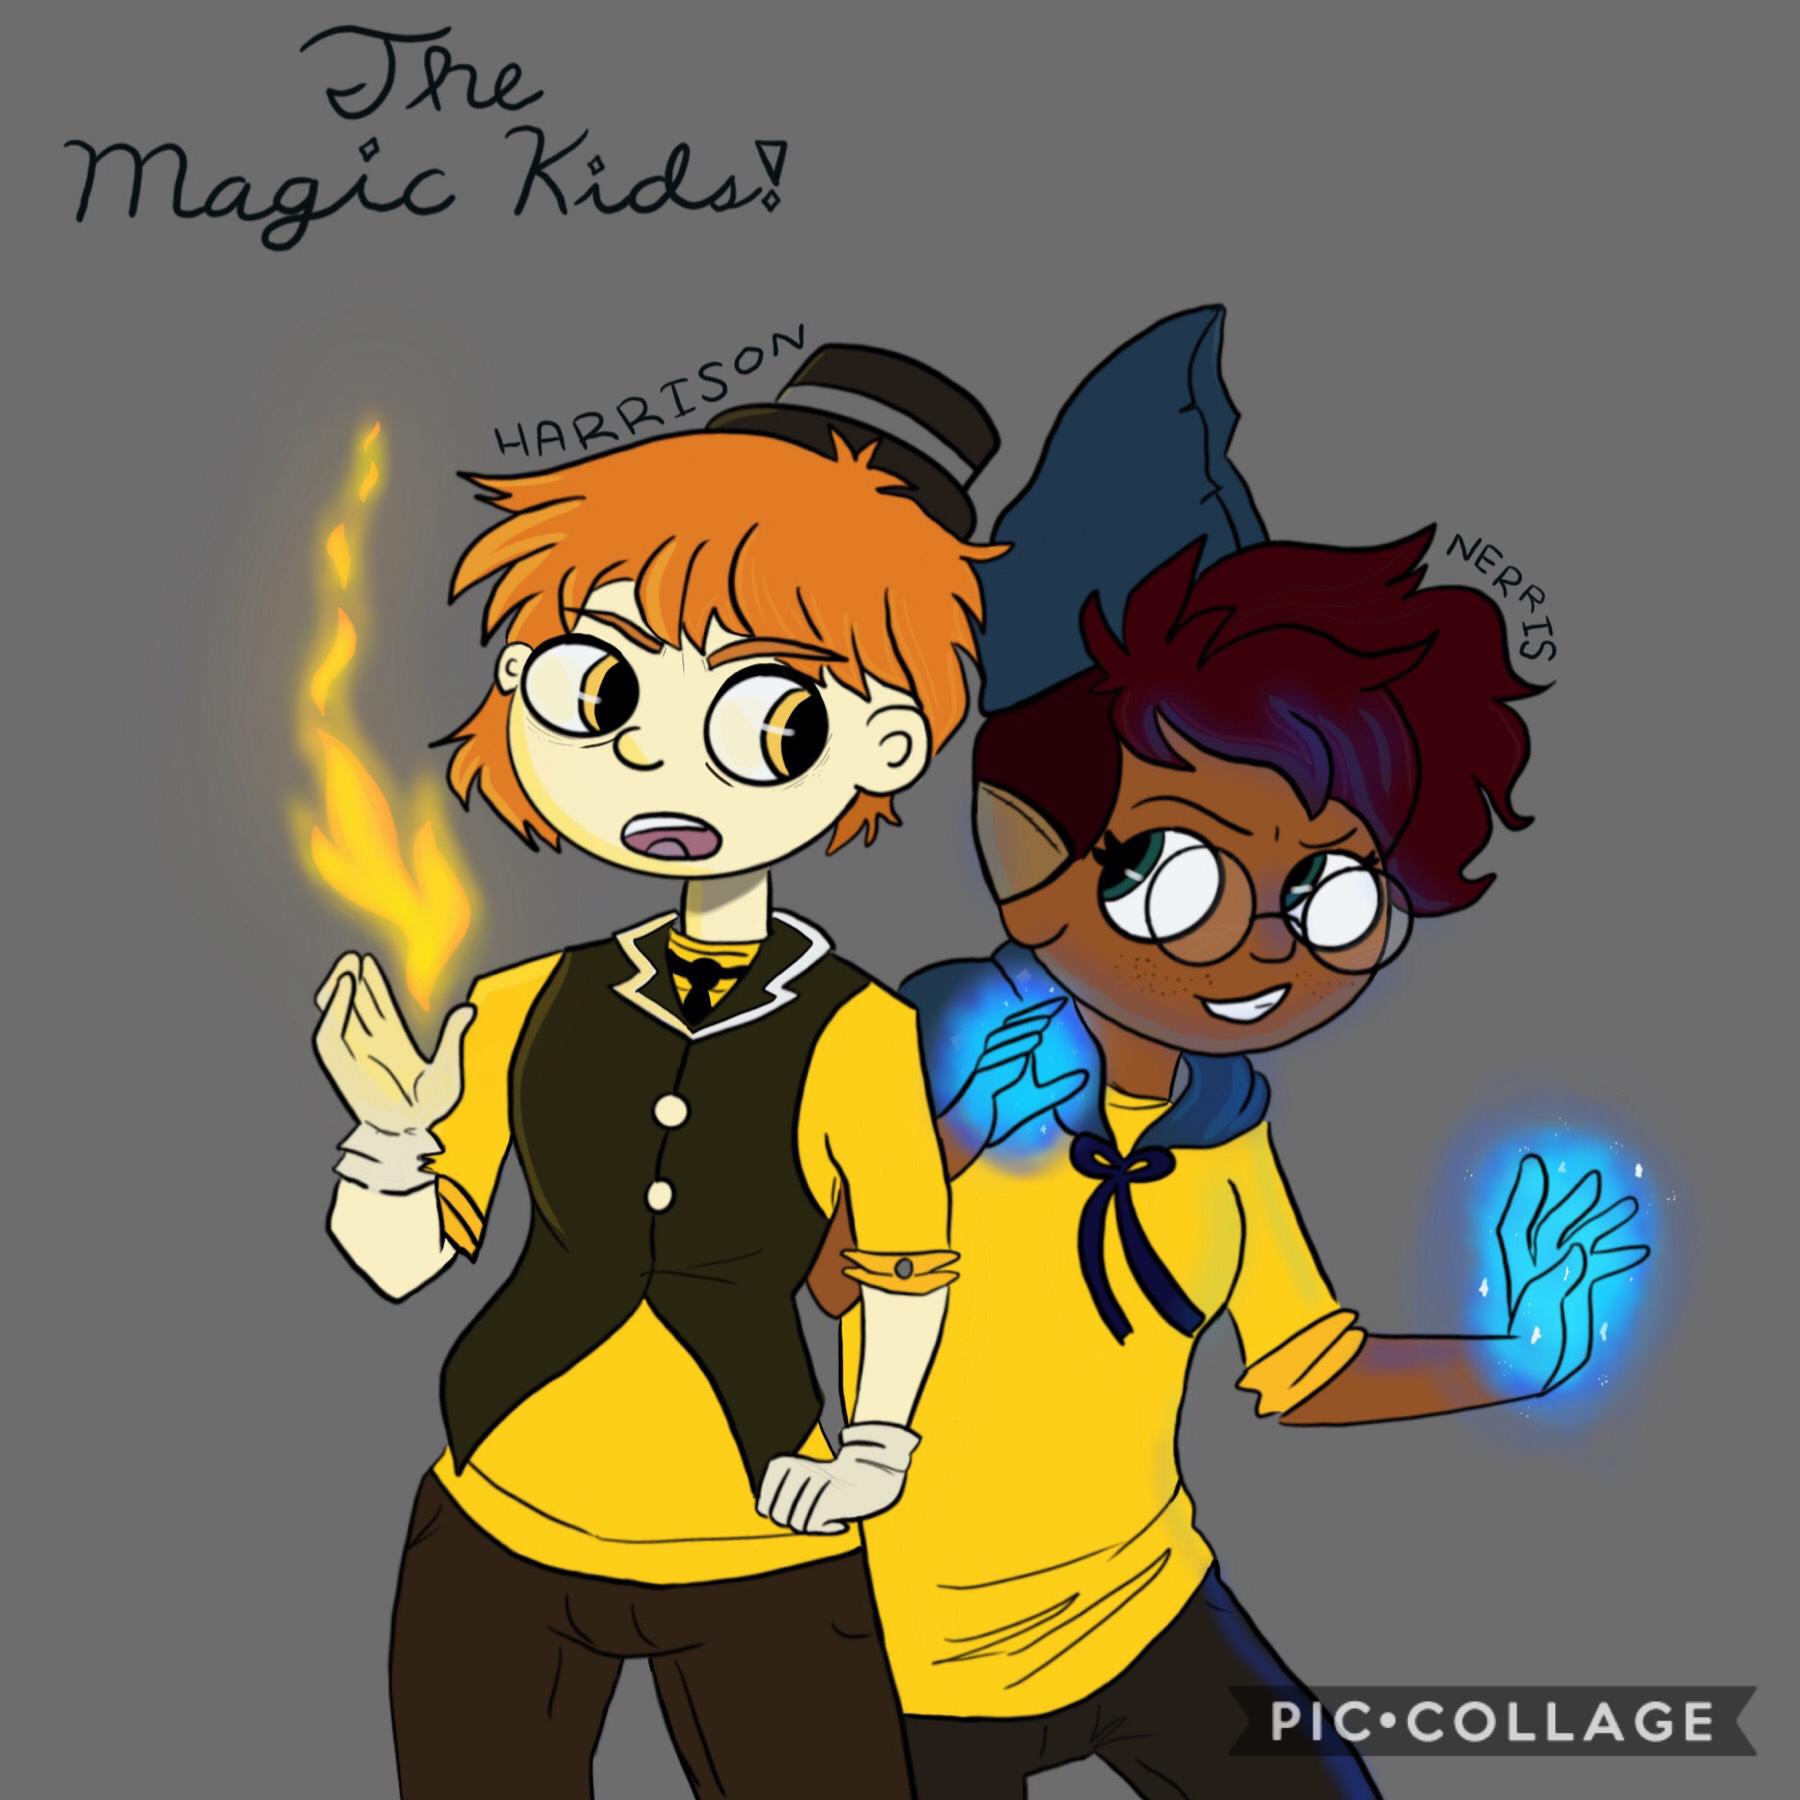 hey y’all my best friend lei (she used to run this account with me lol) remade and colored my magic kids drawing!!! it’s so awesome ahjsksksksk